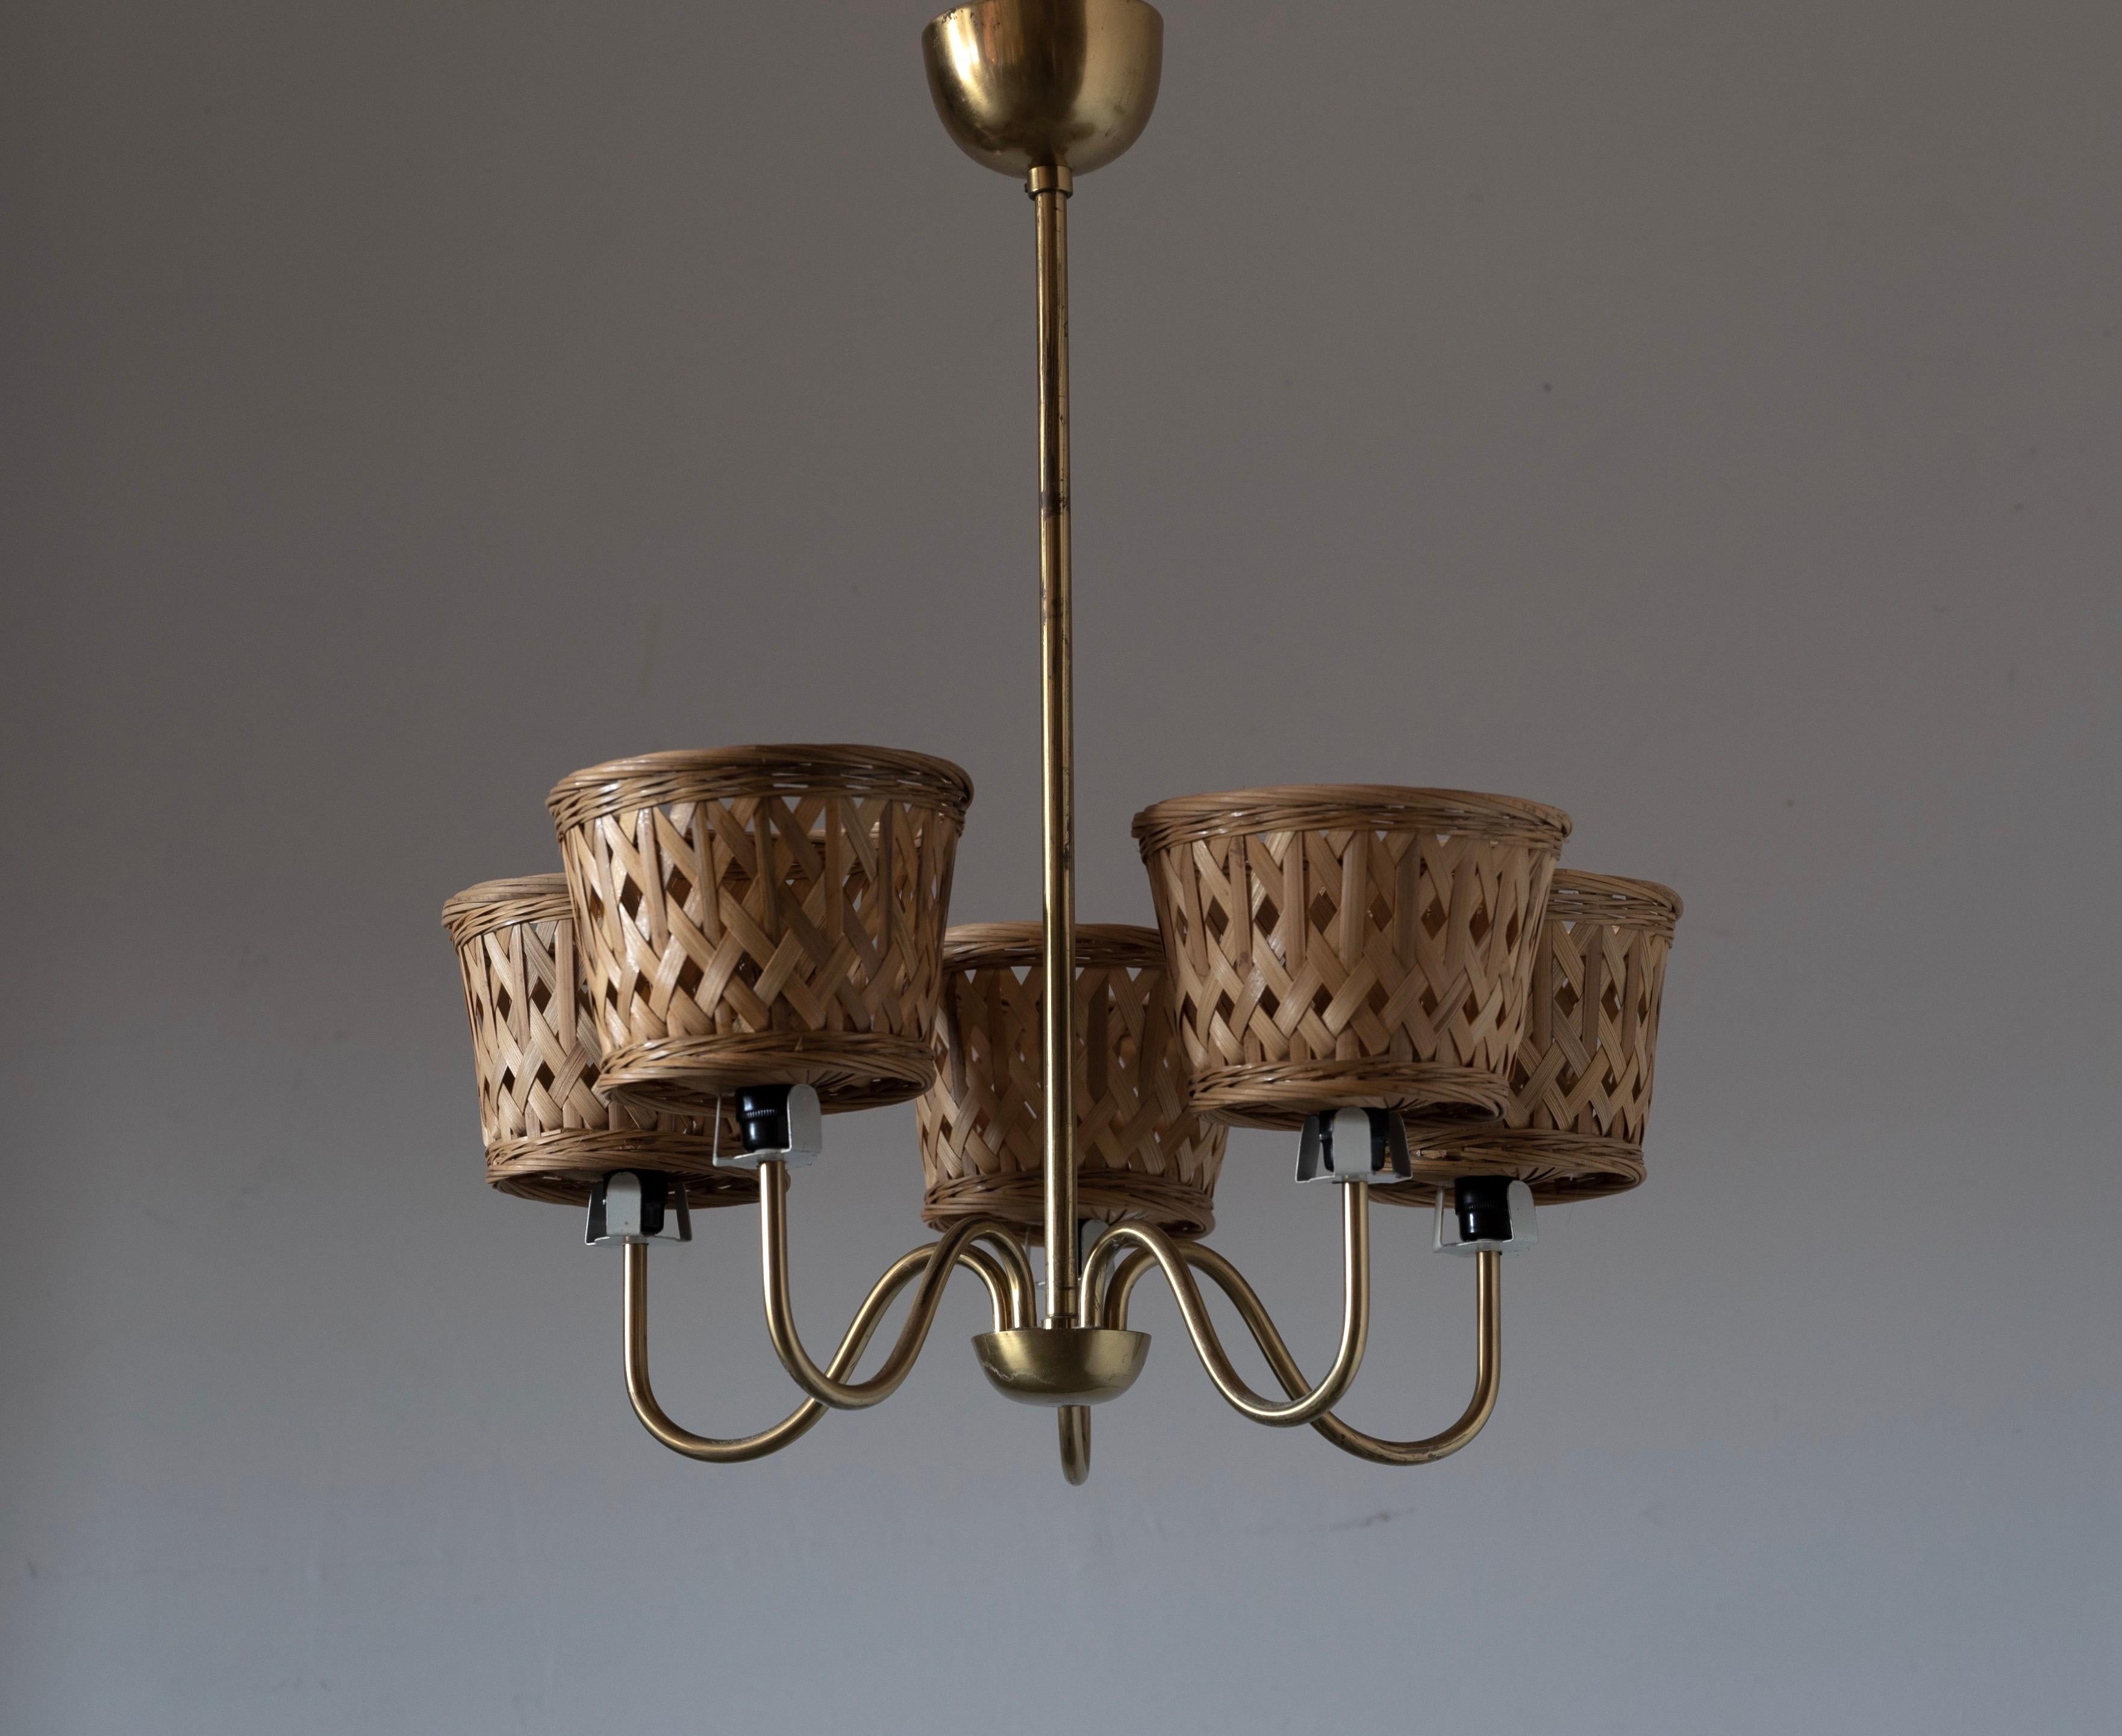 A small five armed chandelier, designed and produced in Sweden, 1950s. In brass with assorted vintage rattan lampshades. Mounted atop lacquered metal fittings likely originally mounting glass diffusers.

Measurements are from the bottom of the